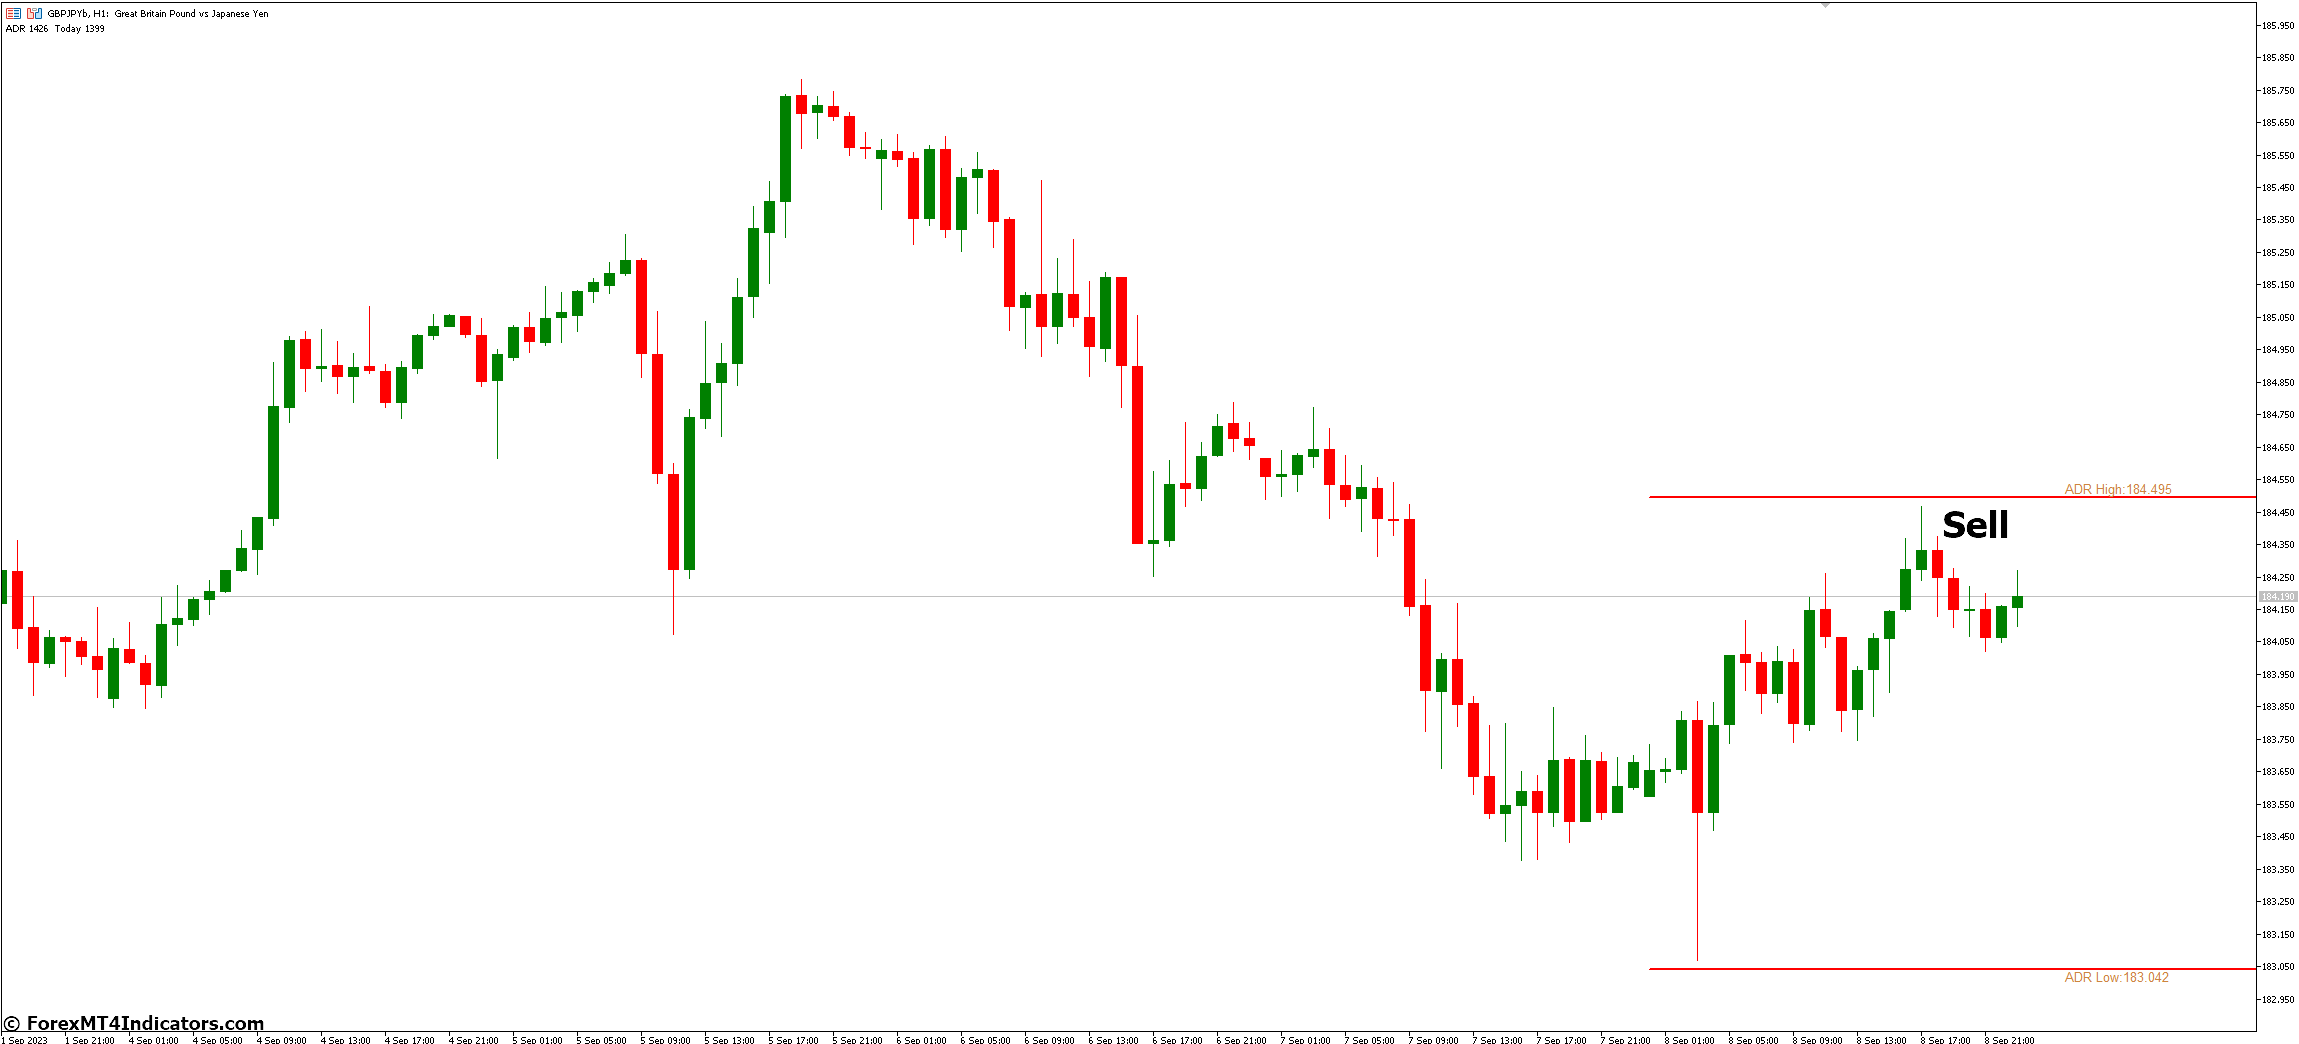 How to Trade with ADR MT5 Indicator - Sell Entry